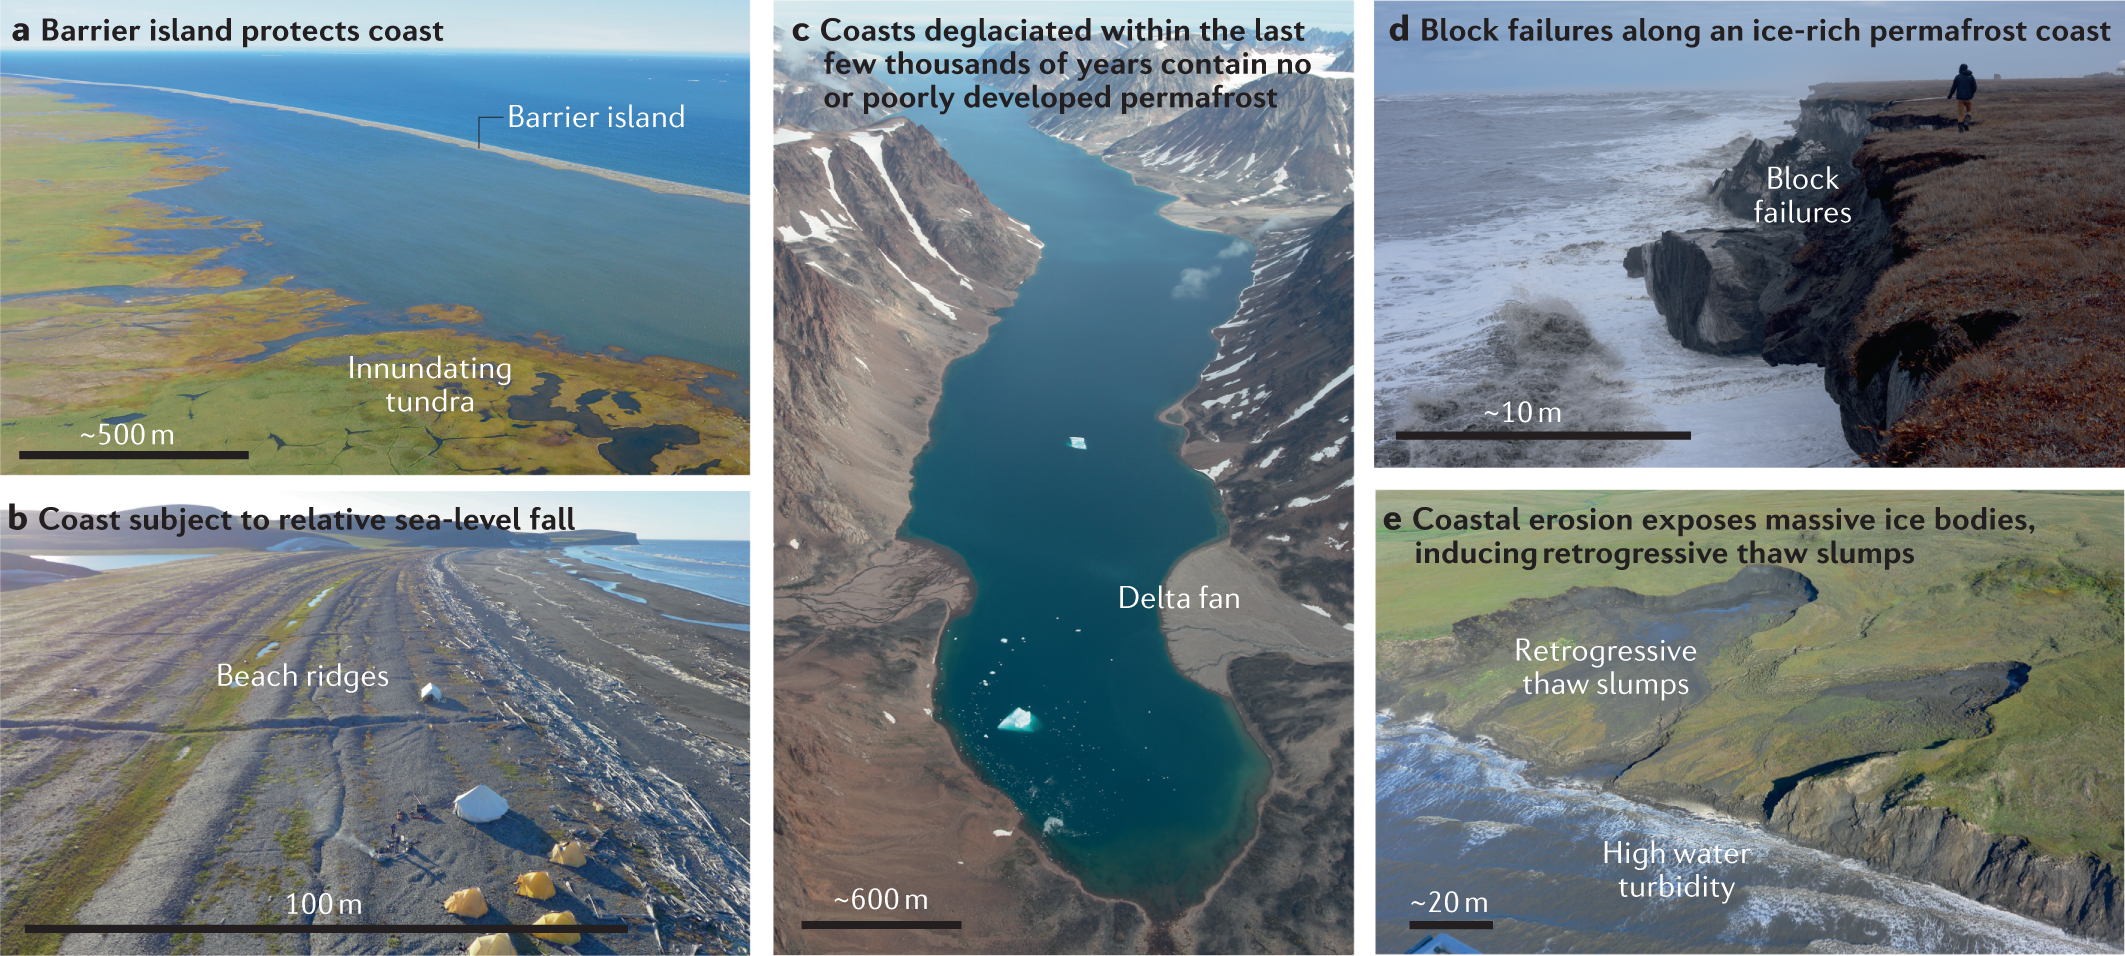 Consequences of Rapid Environmental Arctic Change for People